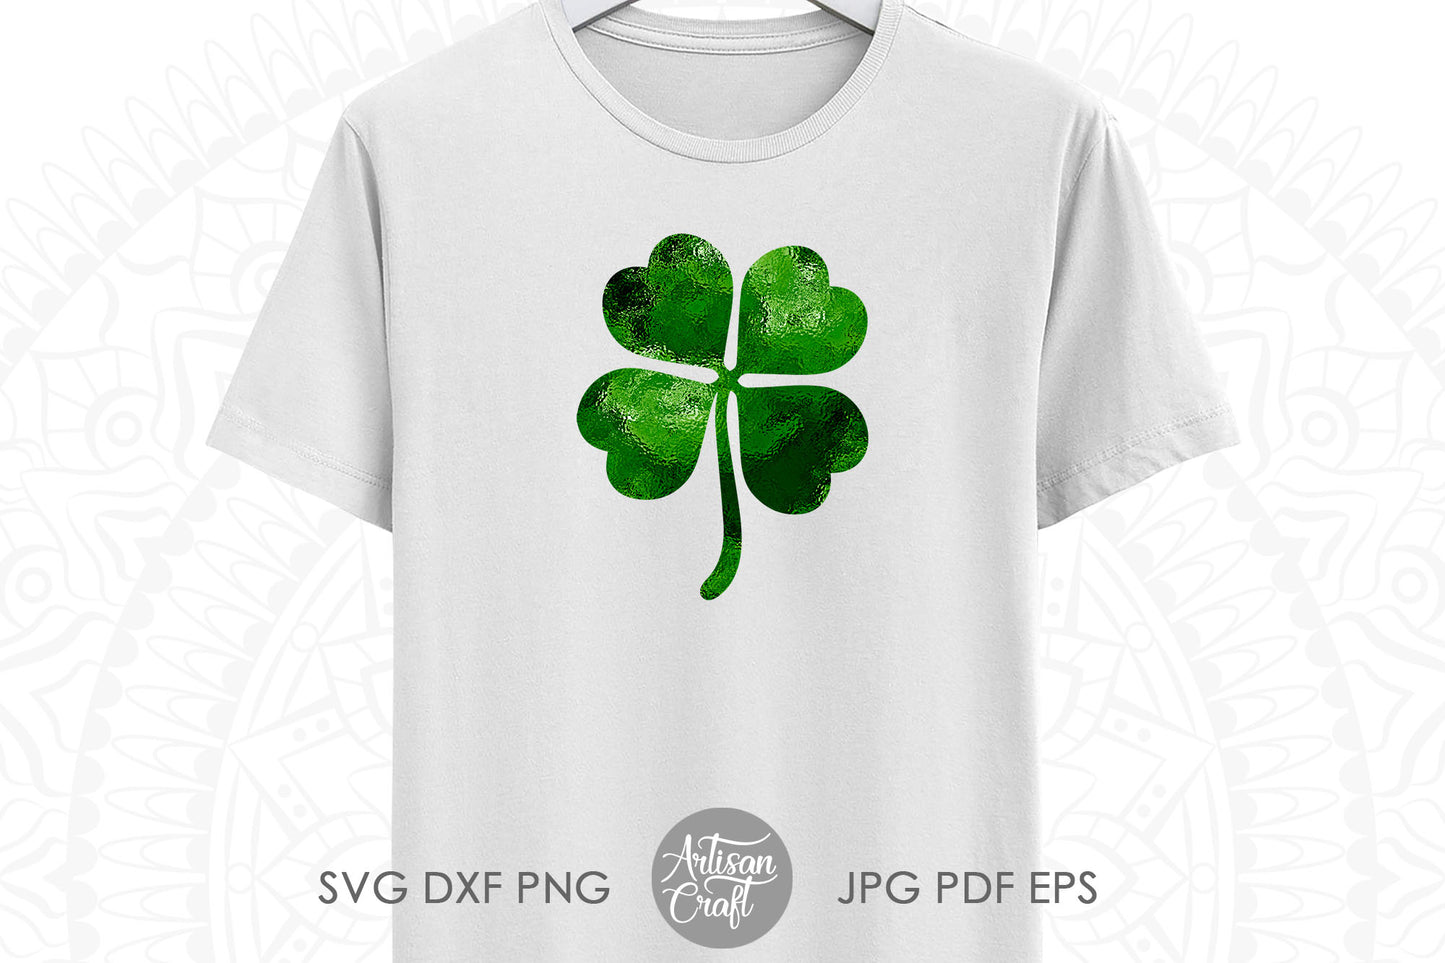 Glitter clover PNG for St Patrick's Day